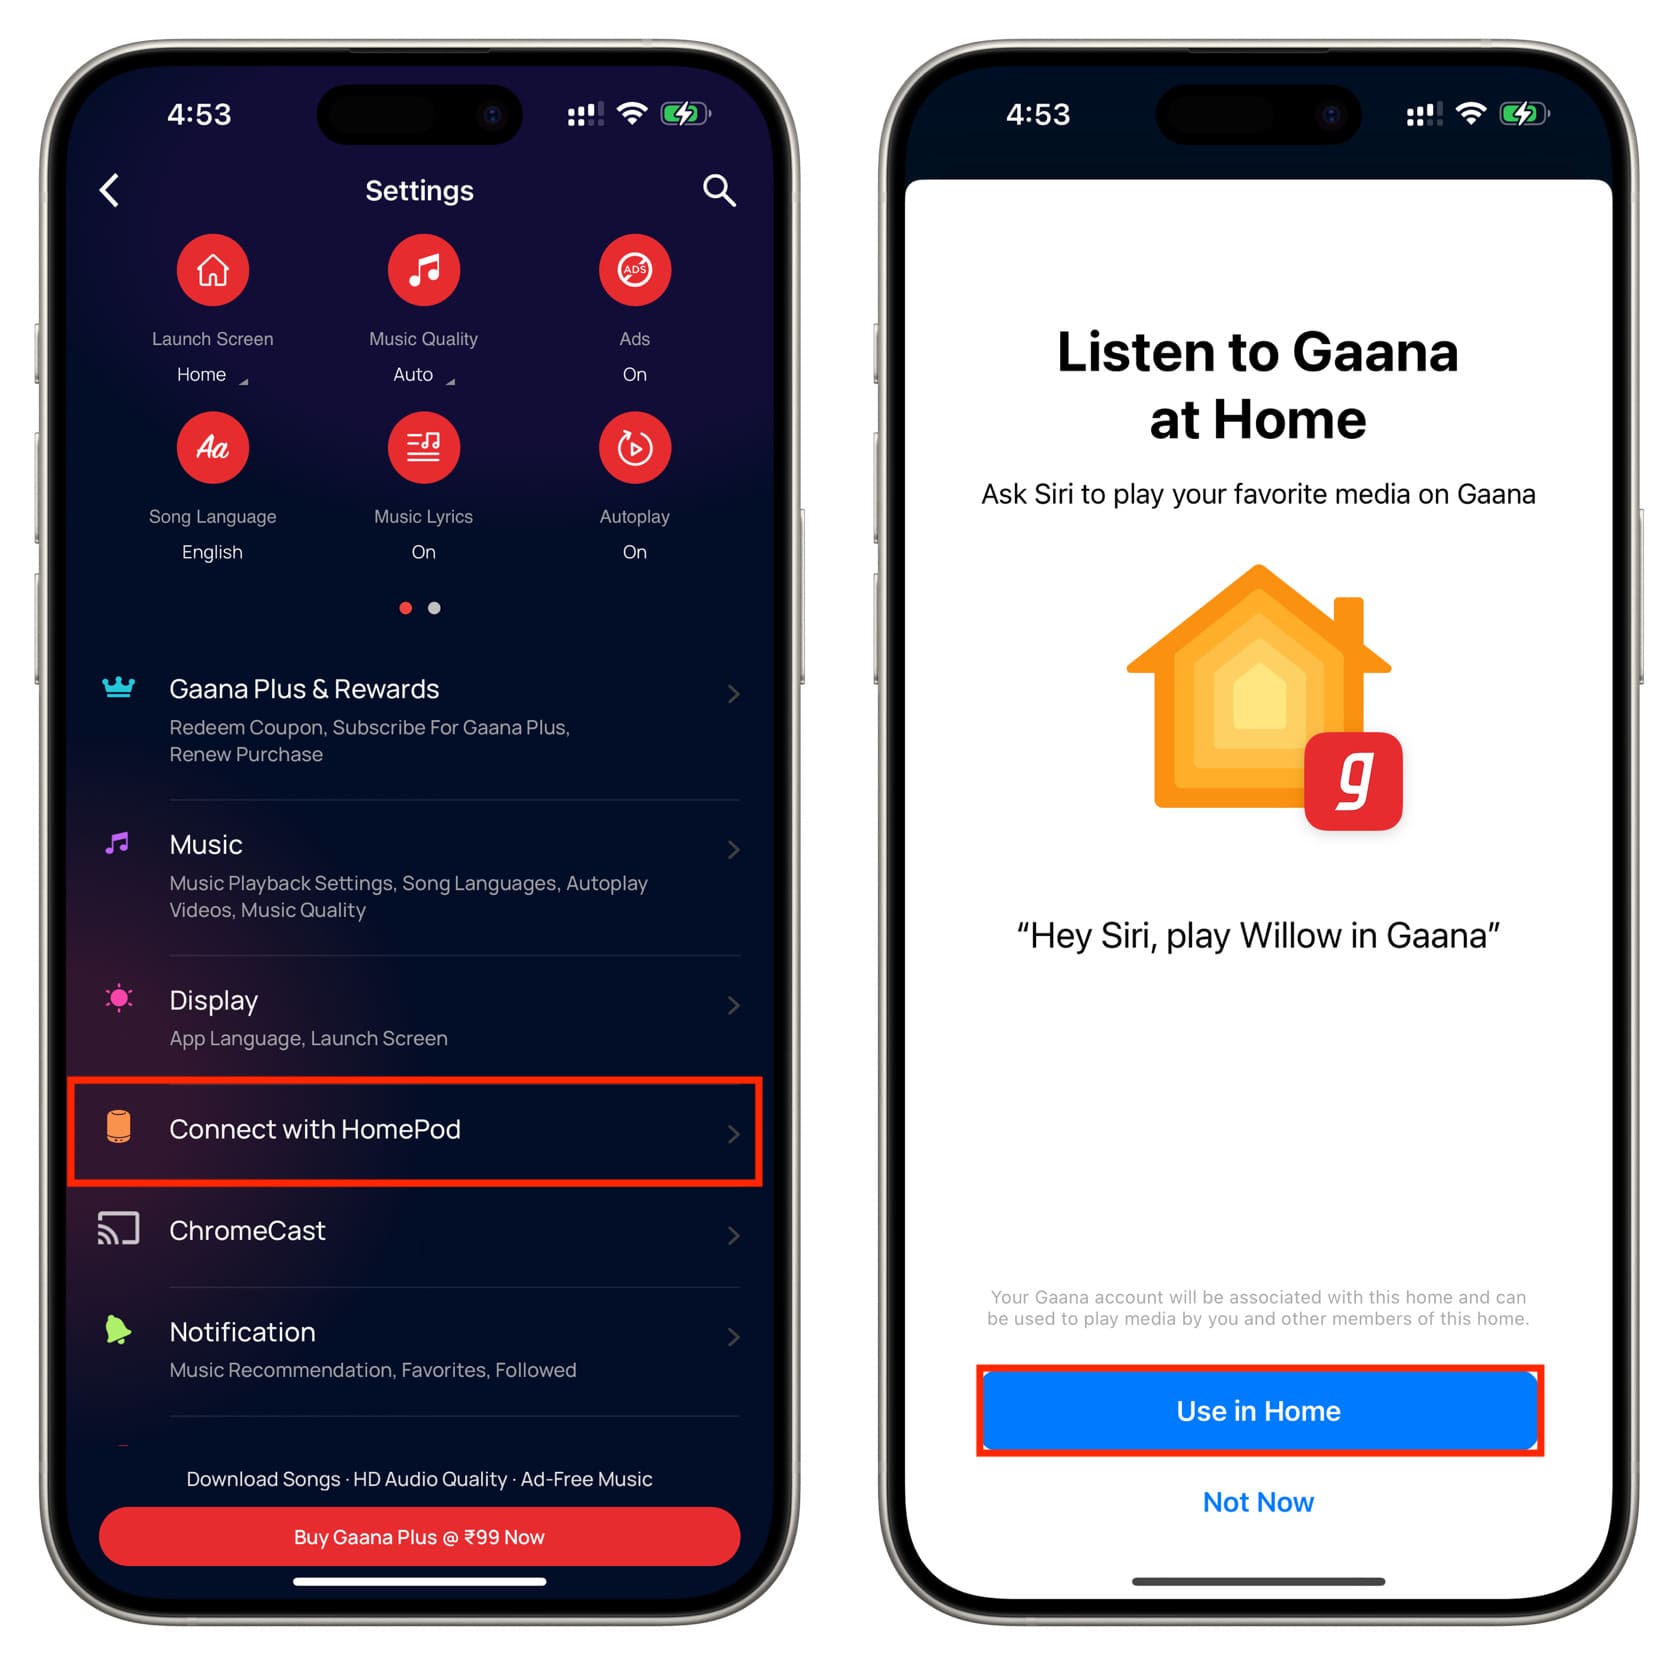 Connect with HomePod option in Gaana app on iPhone